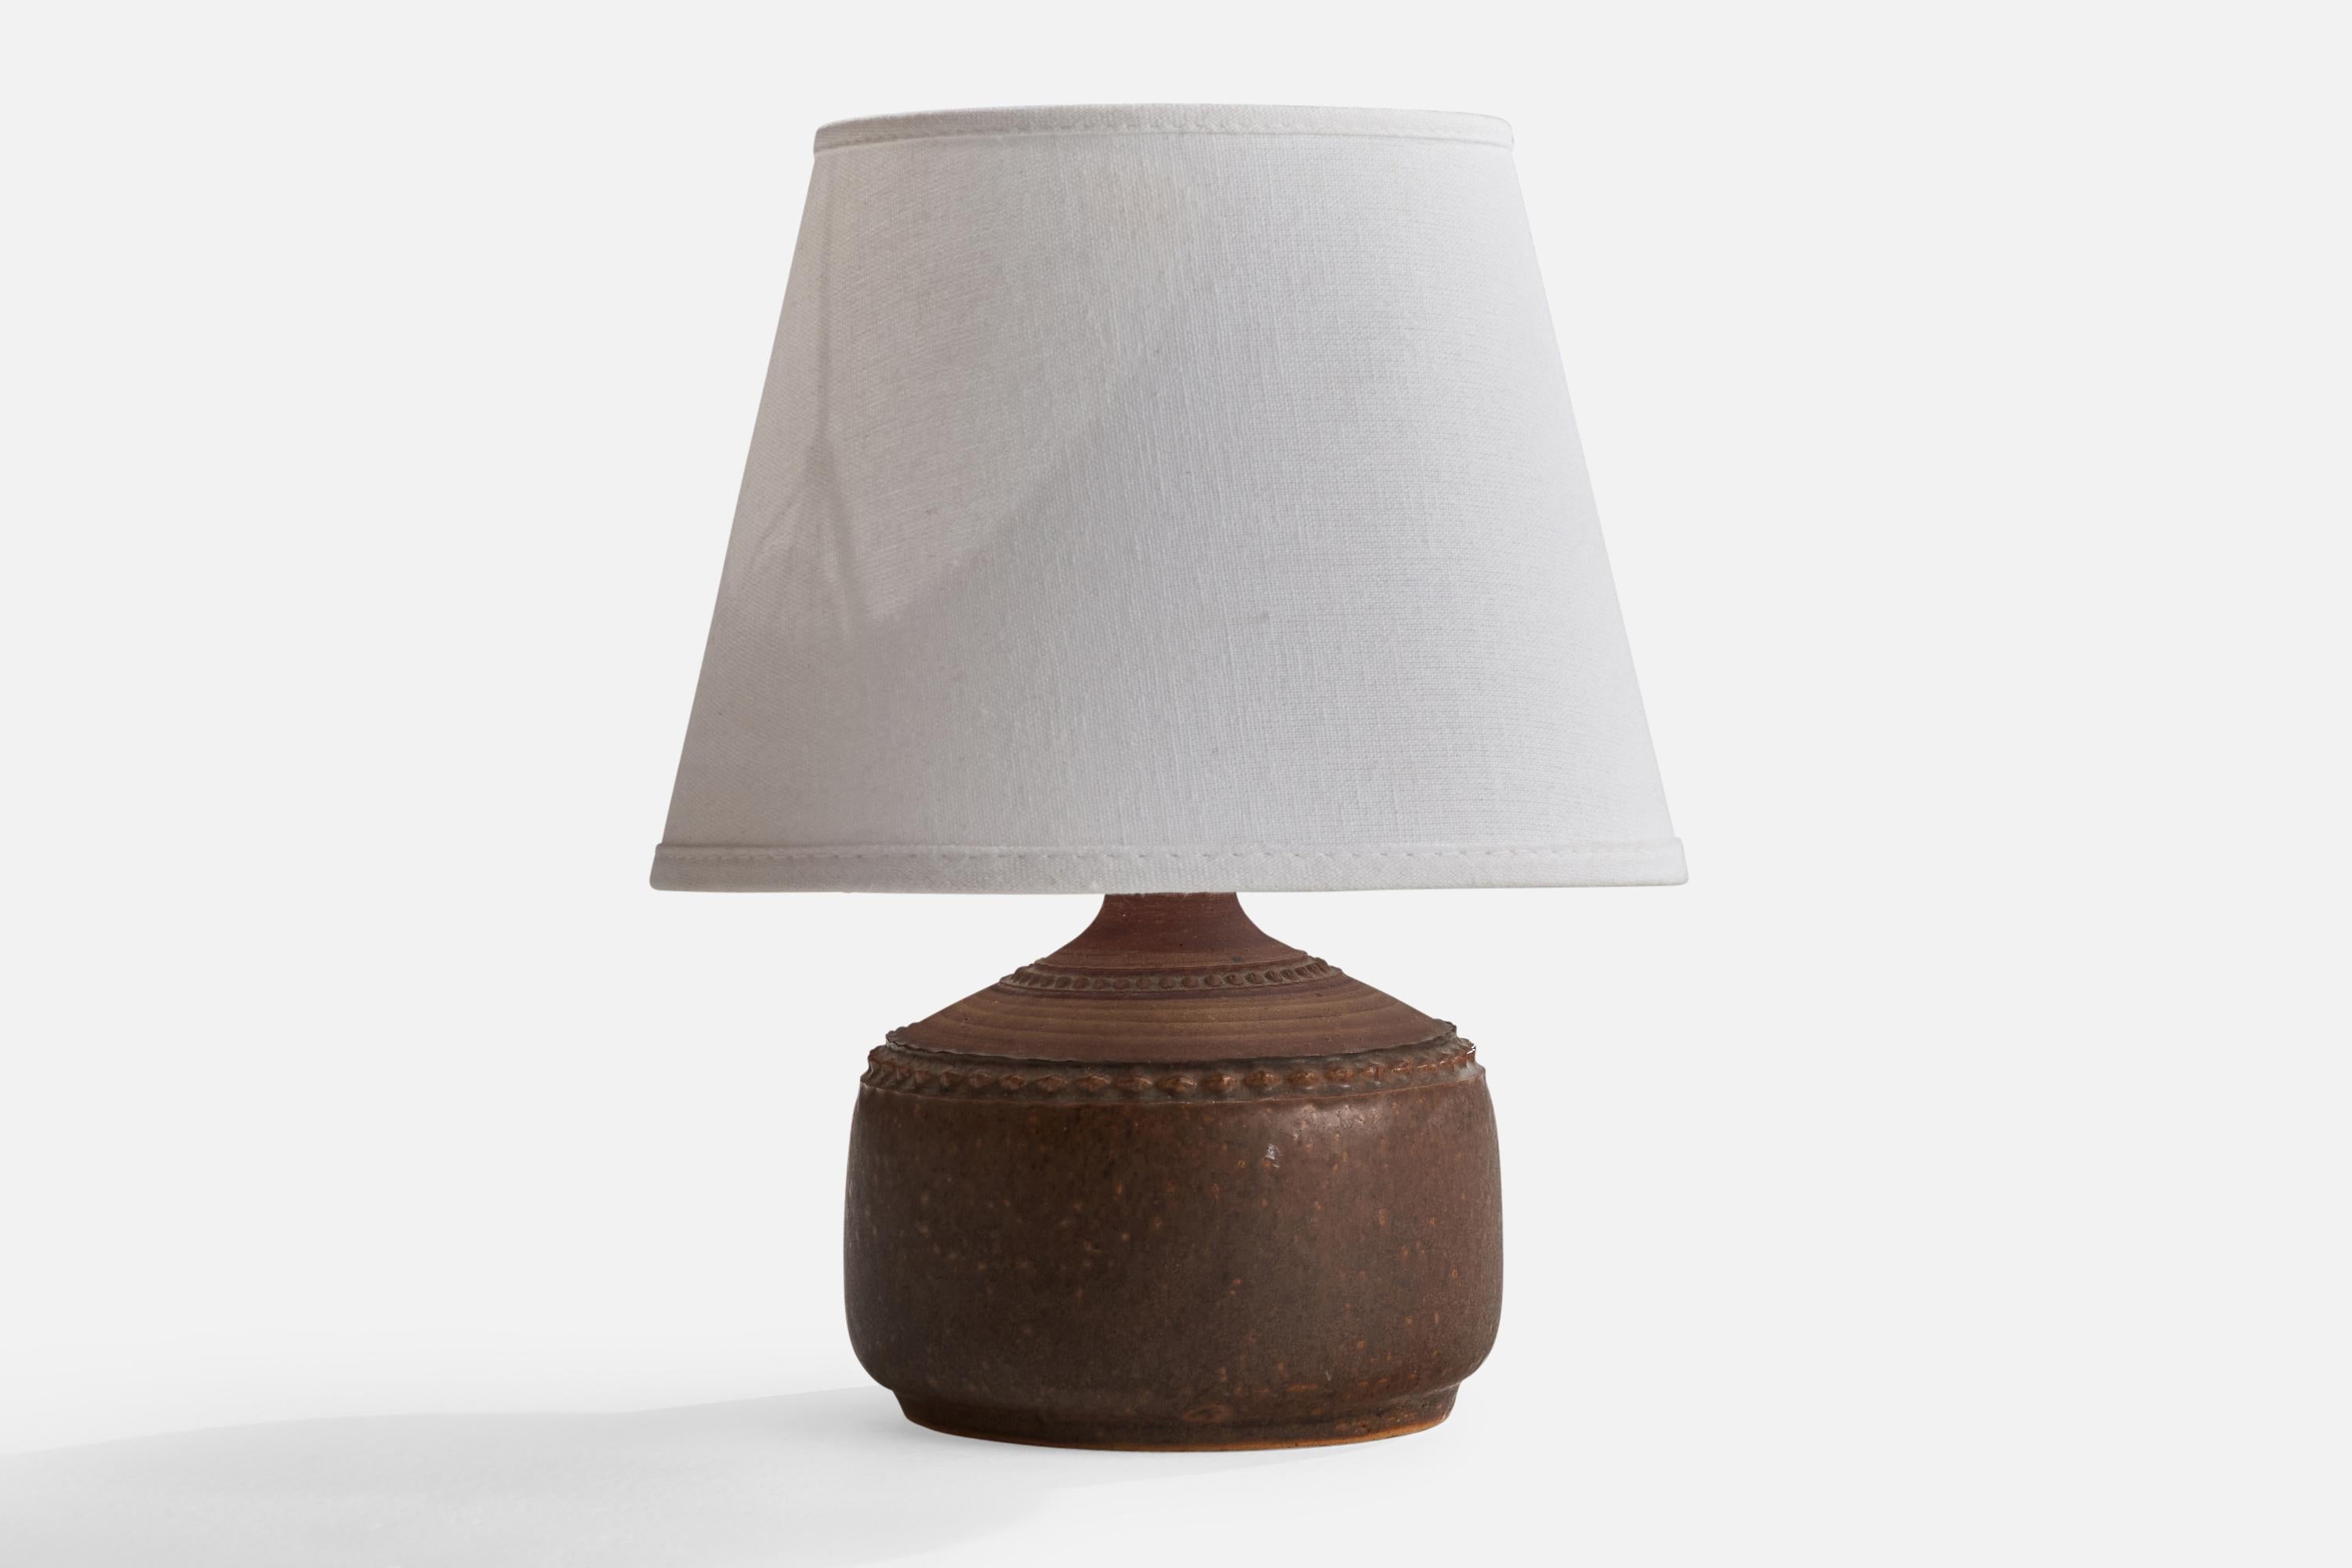 A brown-glazed stoneware table lamp designed and produced by Klase Höganäs, Sweden, 1960s.

Overall Dimensions (inches): 10.25” H x 5” W x 5” D
Stated dimensions include shade.
Bulb Specifications: E-26 Bulb
Number of Sockets: 1
All lighting will be